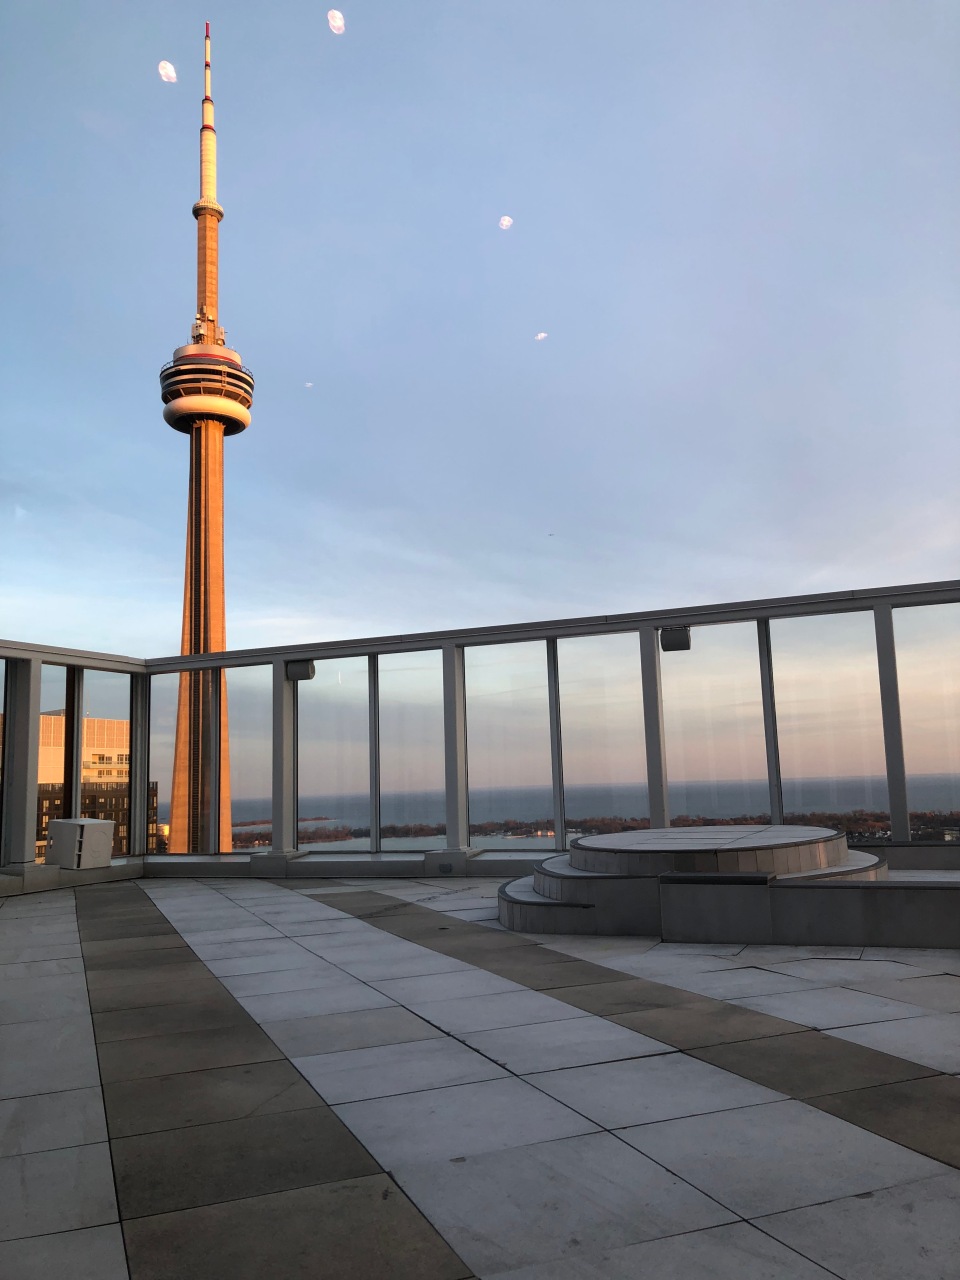 Rooftop Bars - Top things to do in Toronto in Spring!